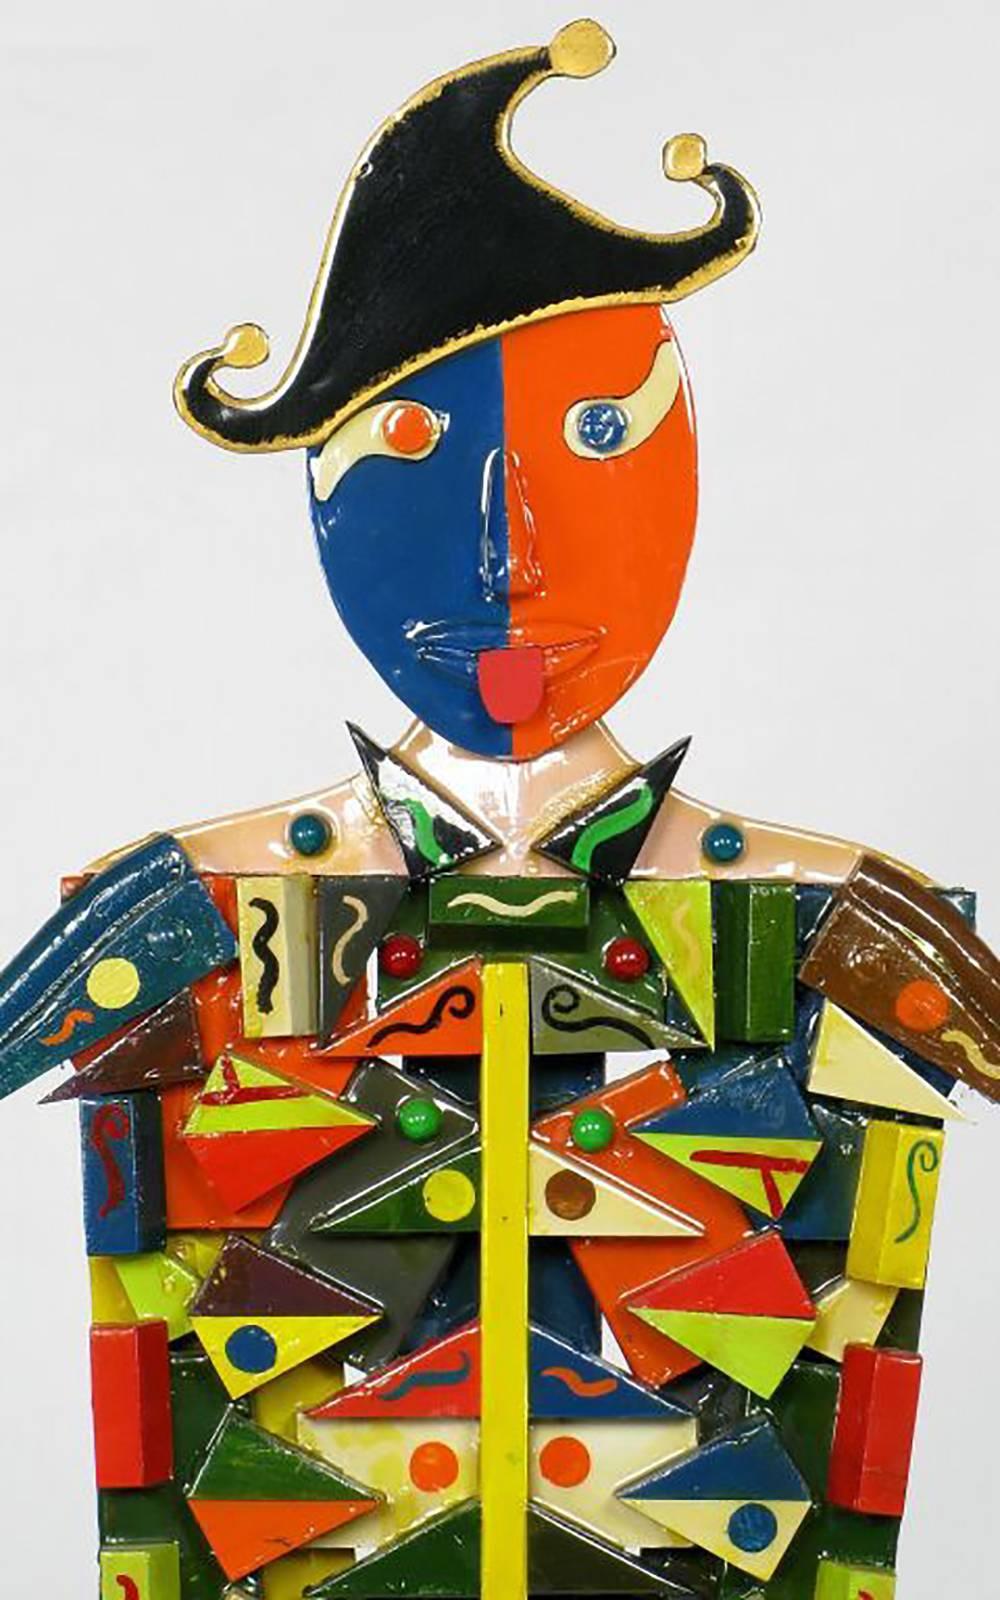 American Signed Colorful Folk Art Lifesize Jester Sculpture For Sale